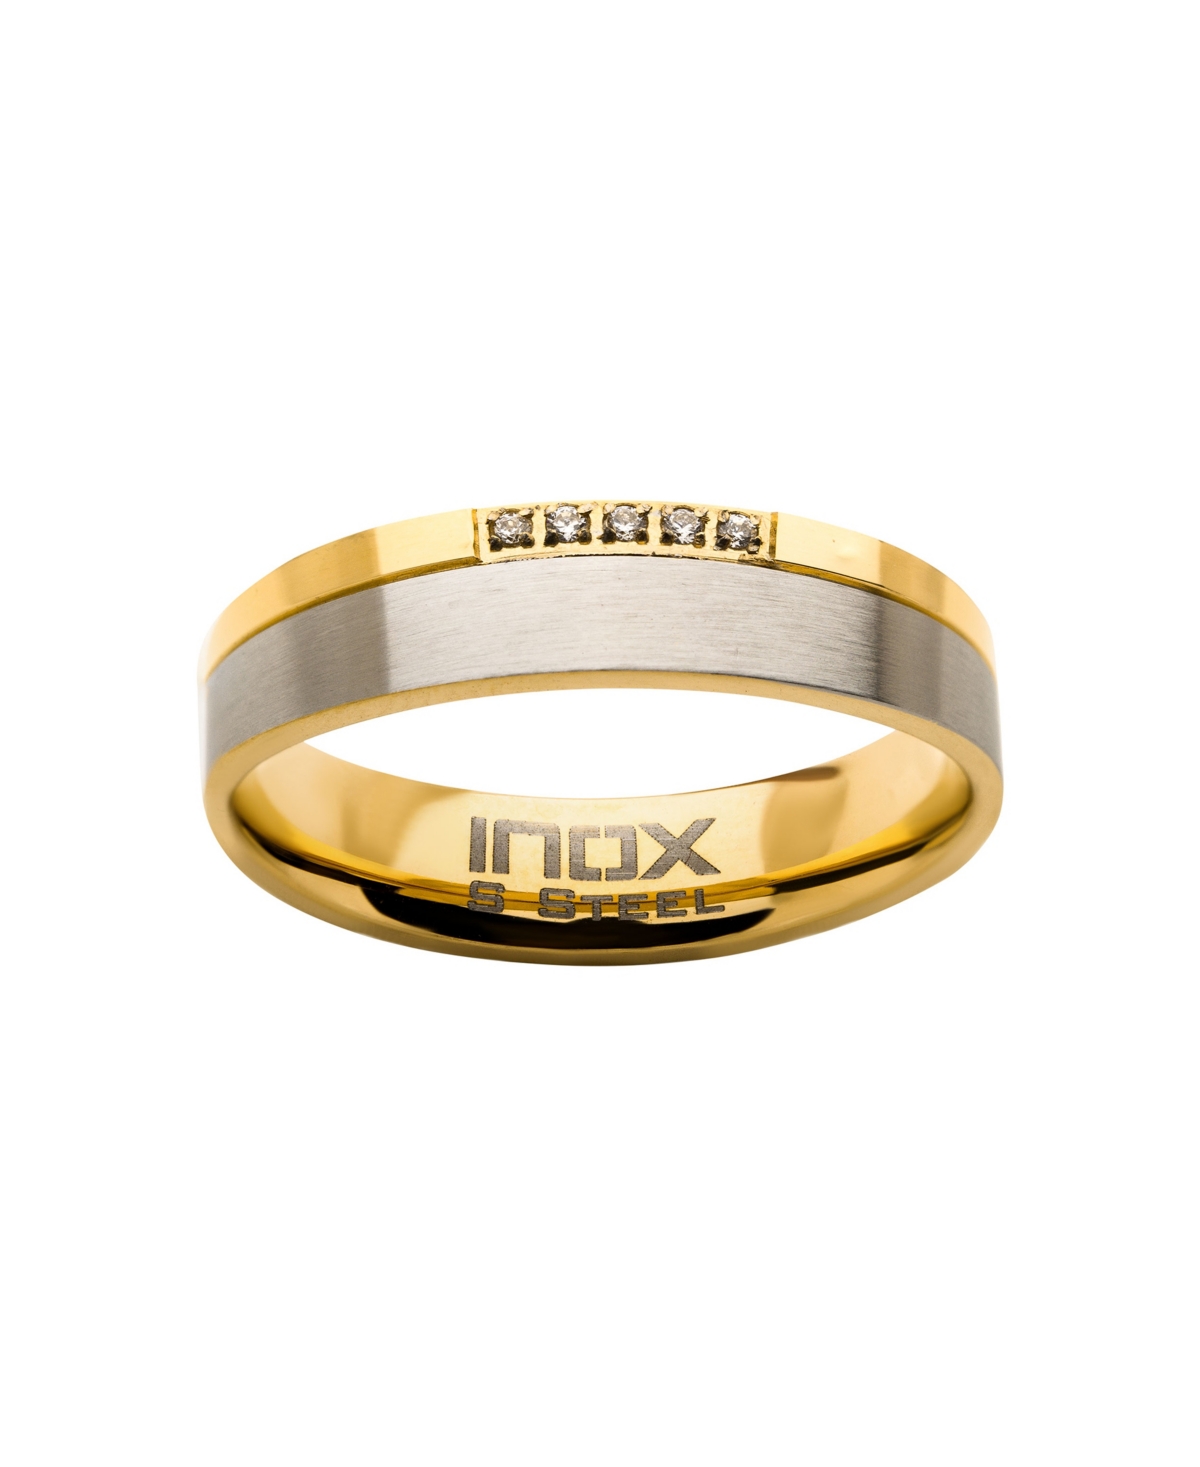 Inox Men's Steel Gold-Tone Plated 5 Piece Clear Diamond Ring